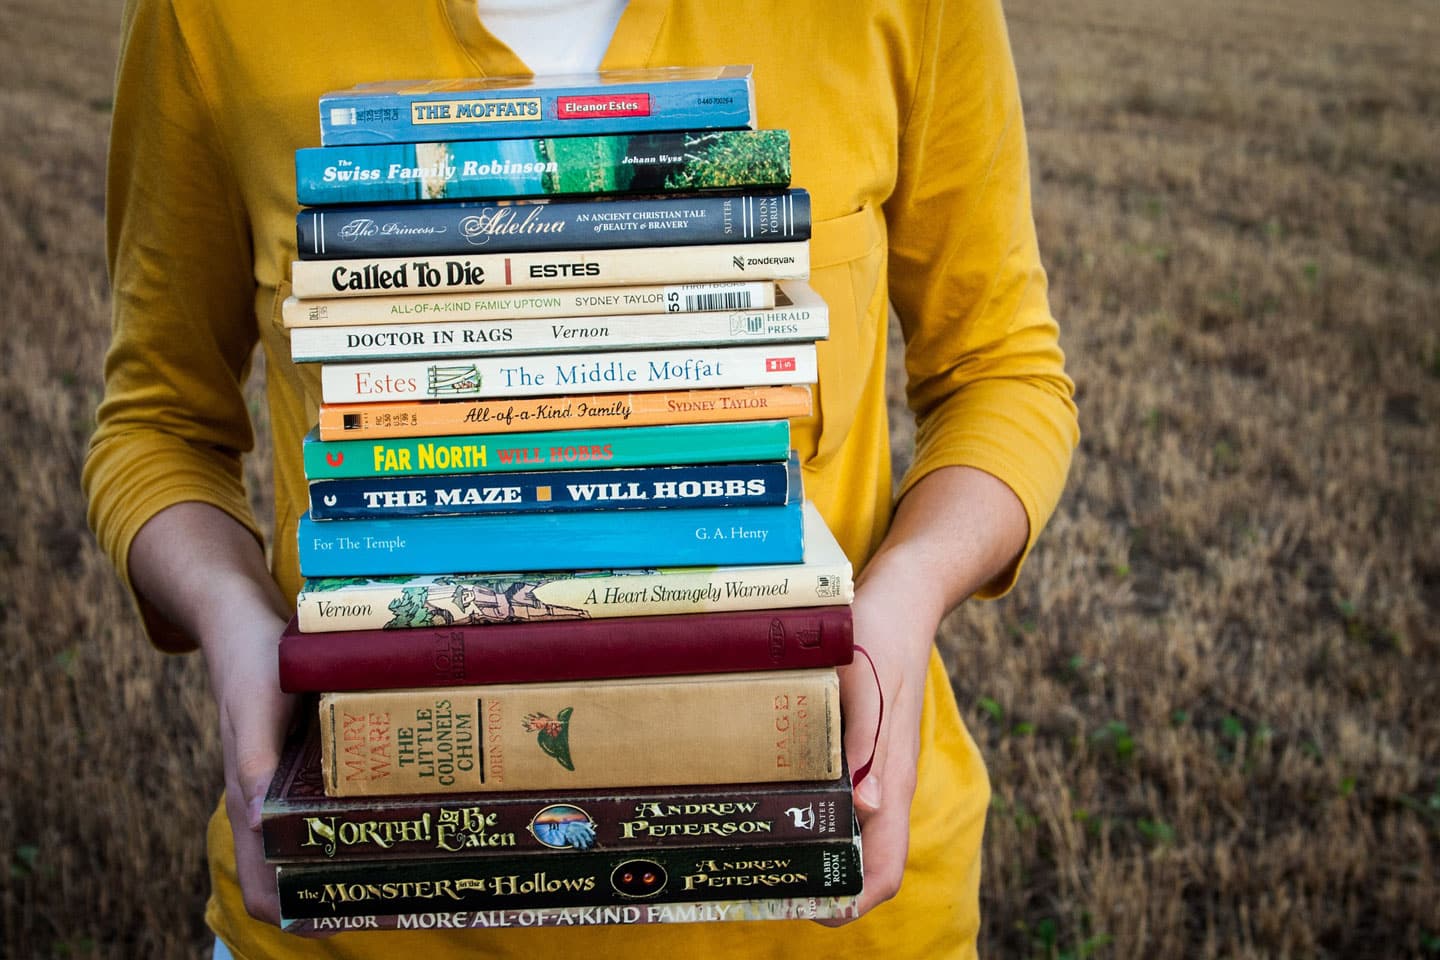 15 Travel Books to Inspire Your Next Eco-Adventure - The Mindful Traveller